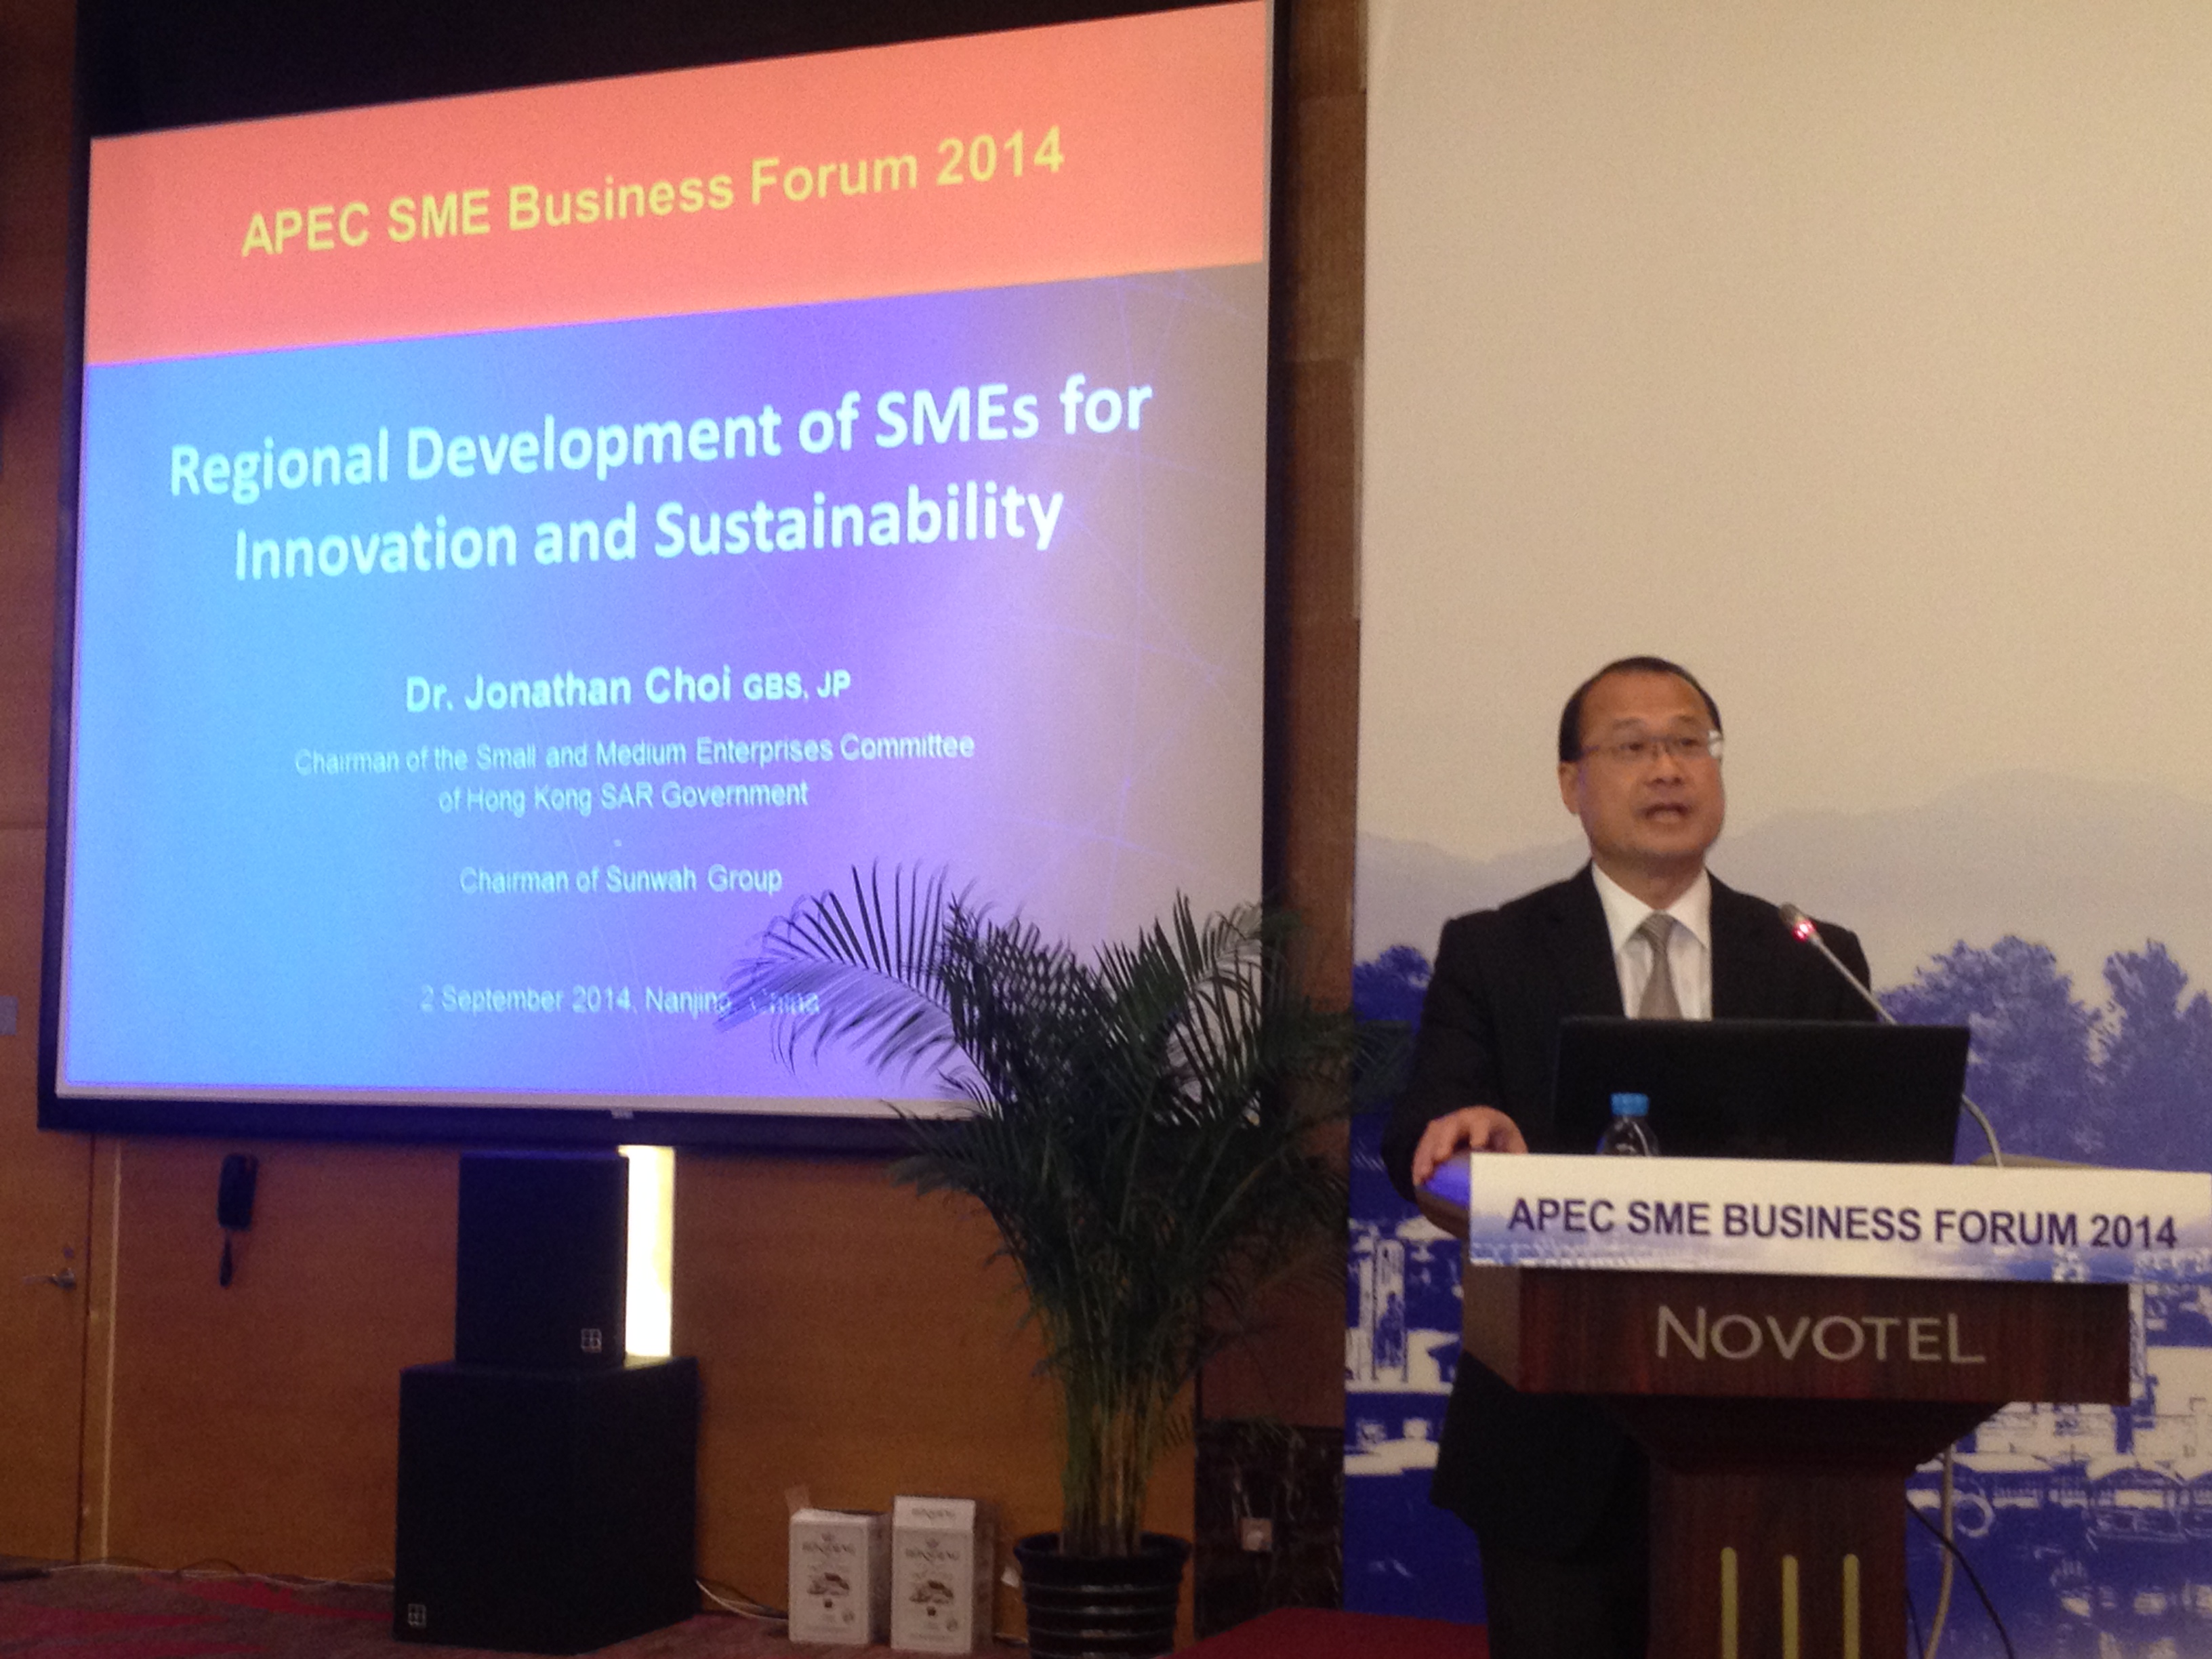 Photo 7 : Dr Jonathan Choi Koon-shum, GBS, JP, Chairman of the Small and Medium Enterprises Committee, attended the APEC SME Business Forum 2014 held in Nanjing on 2 September 2014 as a keynote speaker.